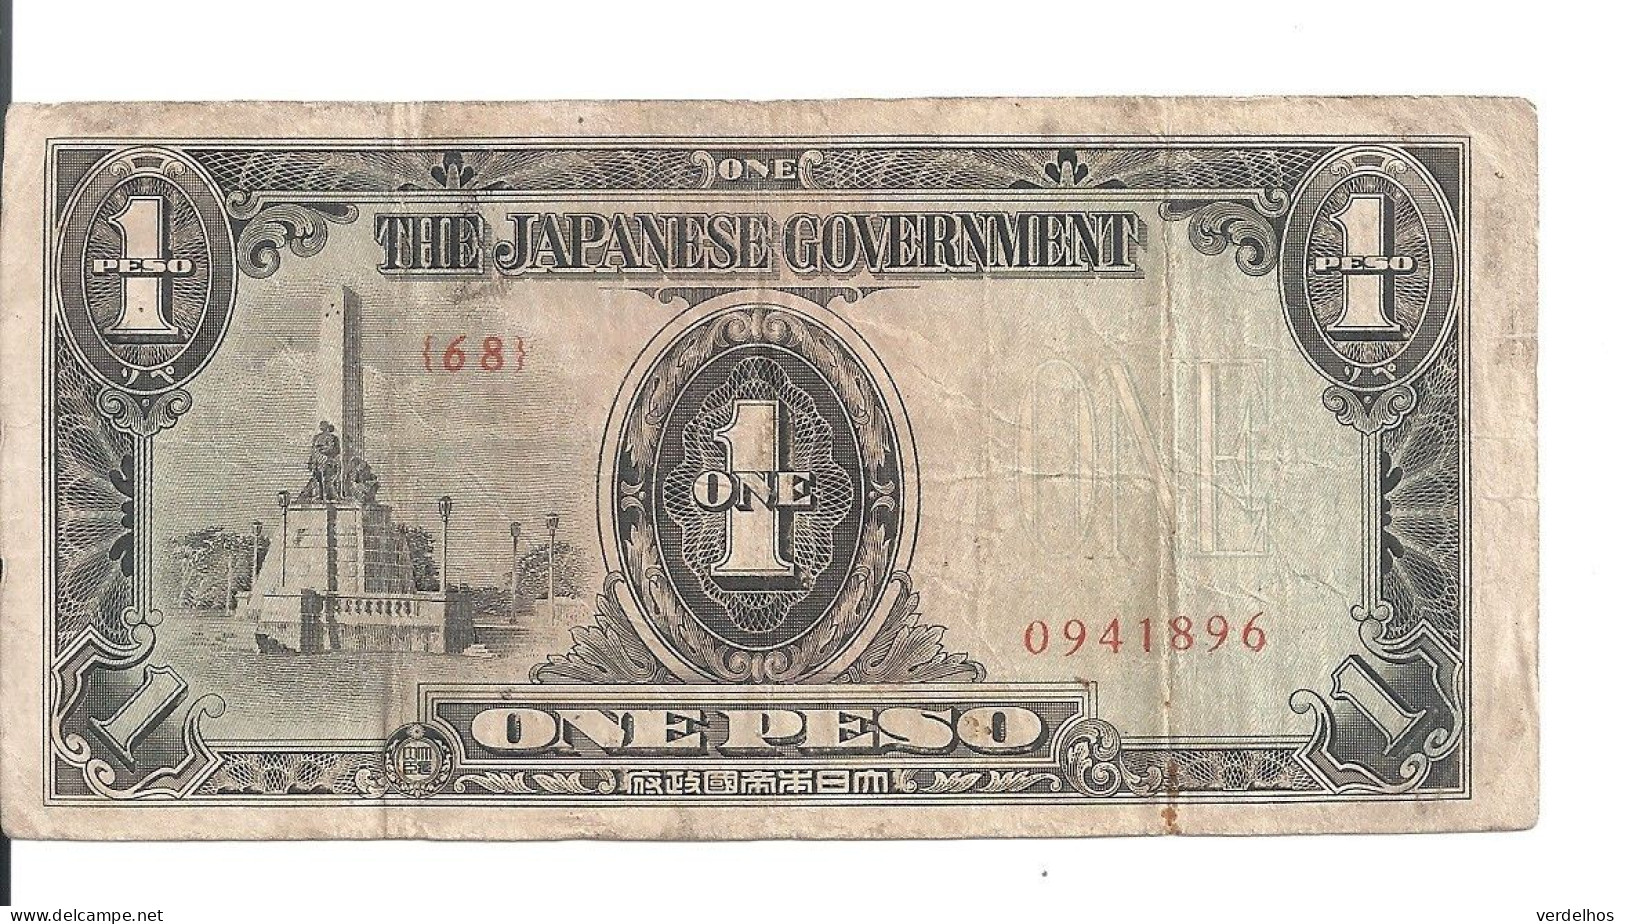 PHILIPPINES ( Japanese Goverment ) 1 PESO ND1943 VF - Philippinen